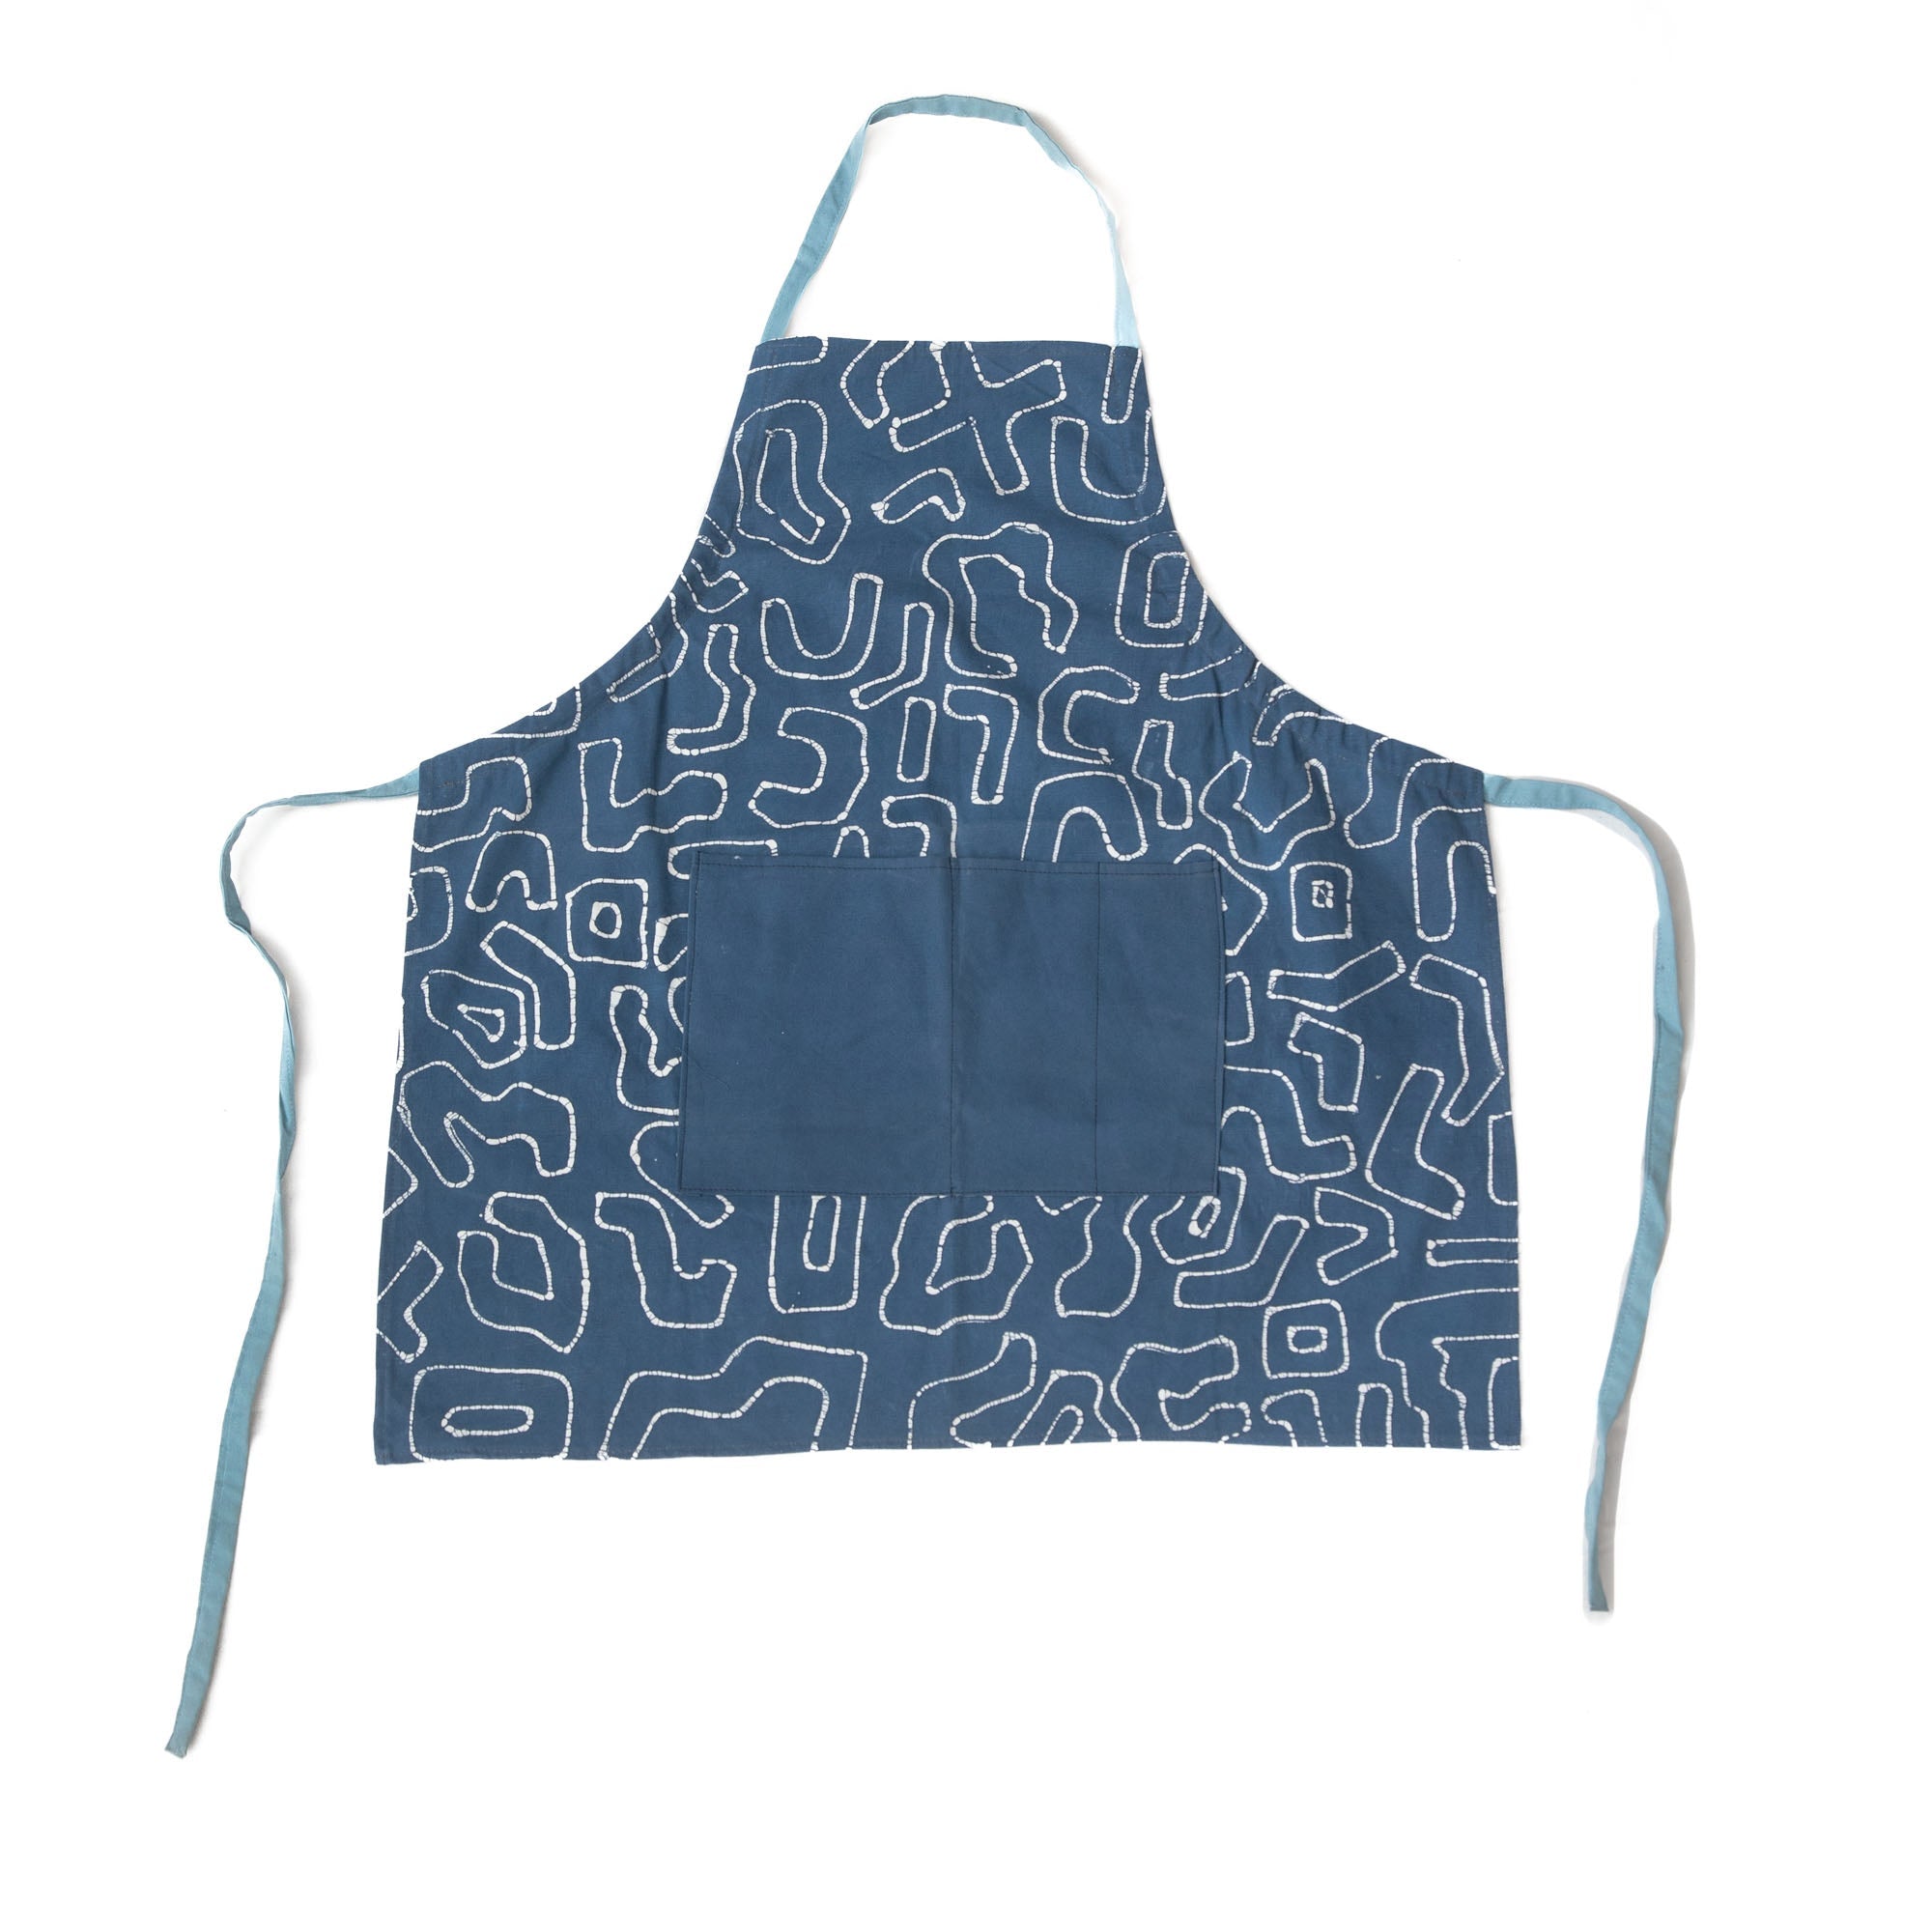 Kuba Blues Outline Indigo Apron - Handmade by TRIBAL TEXTILES - Handcrafted Home Decor Interiors - African Made